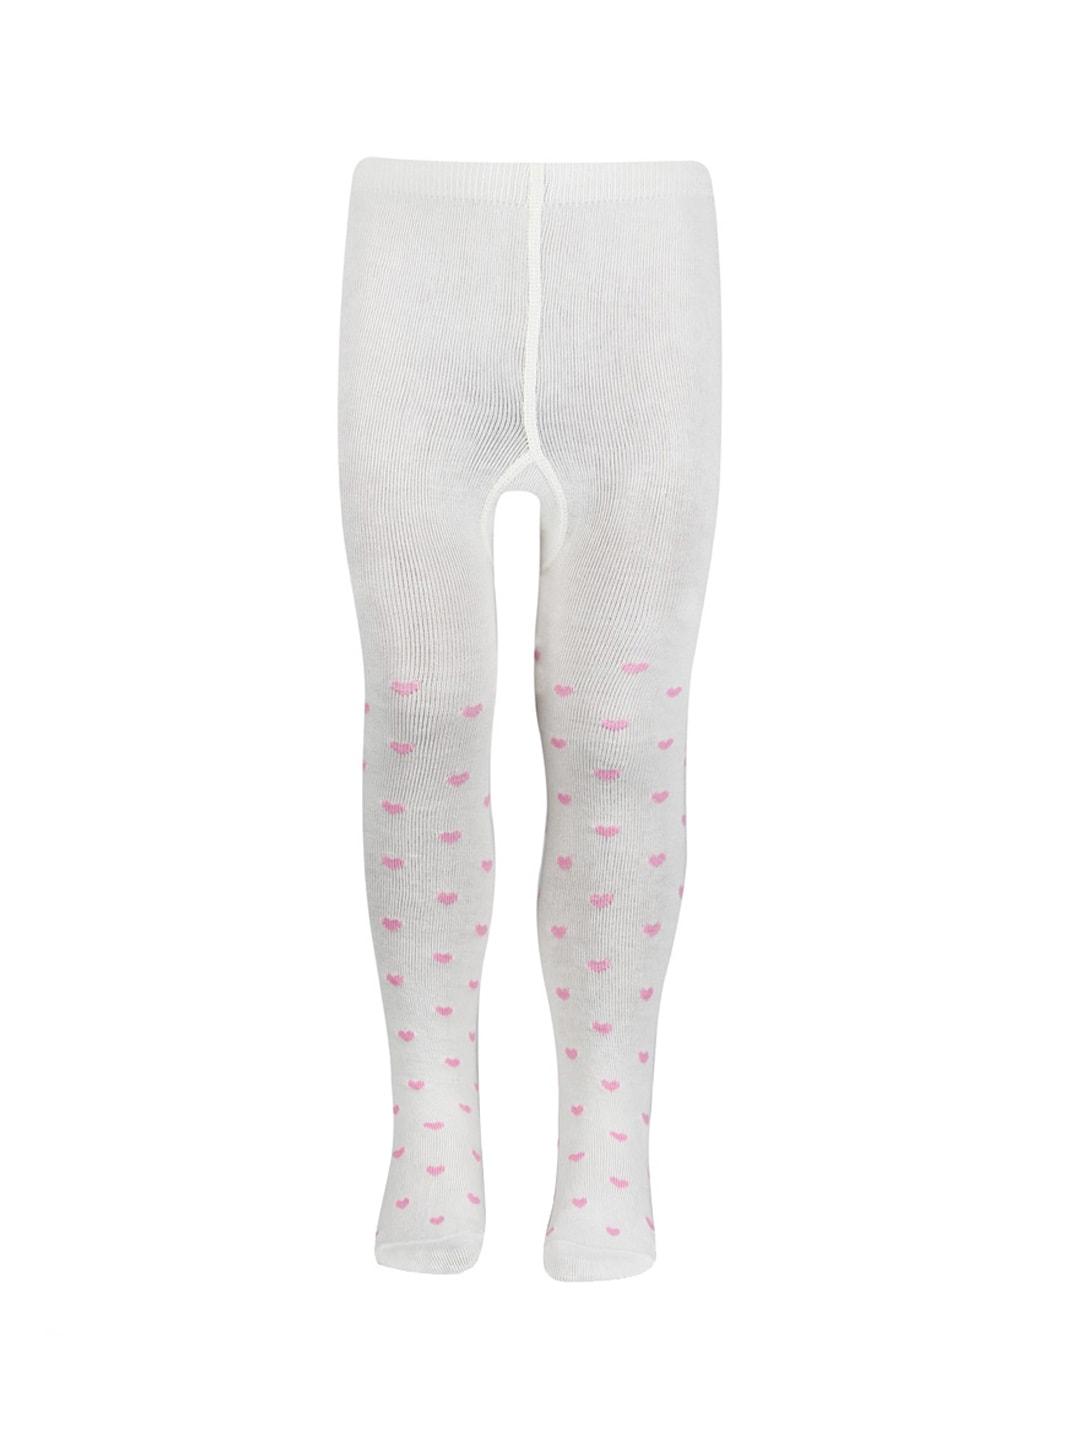 bonjour-kids-printed-cotton-tights-with-attached-stockings